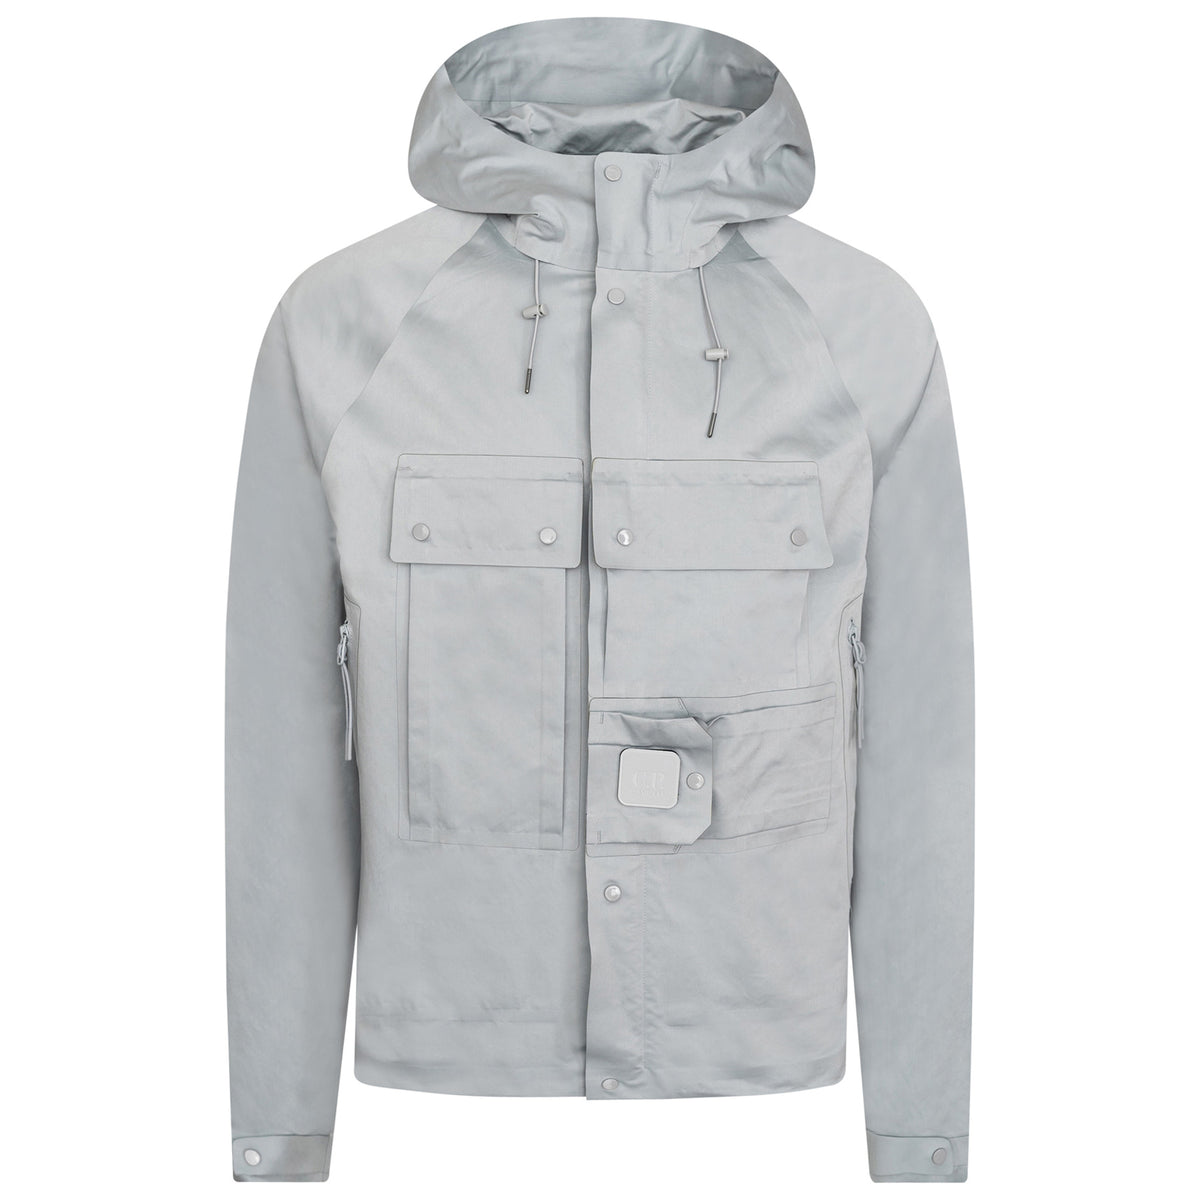 Load image into Gallery viewer, C.P. Company Harbor Mist Metropolis A.A.C. Hood Jacket
